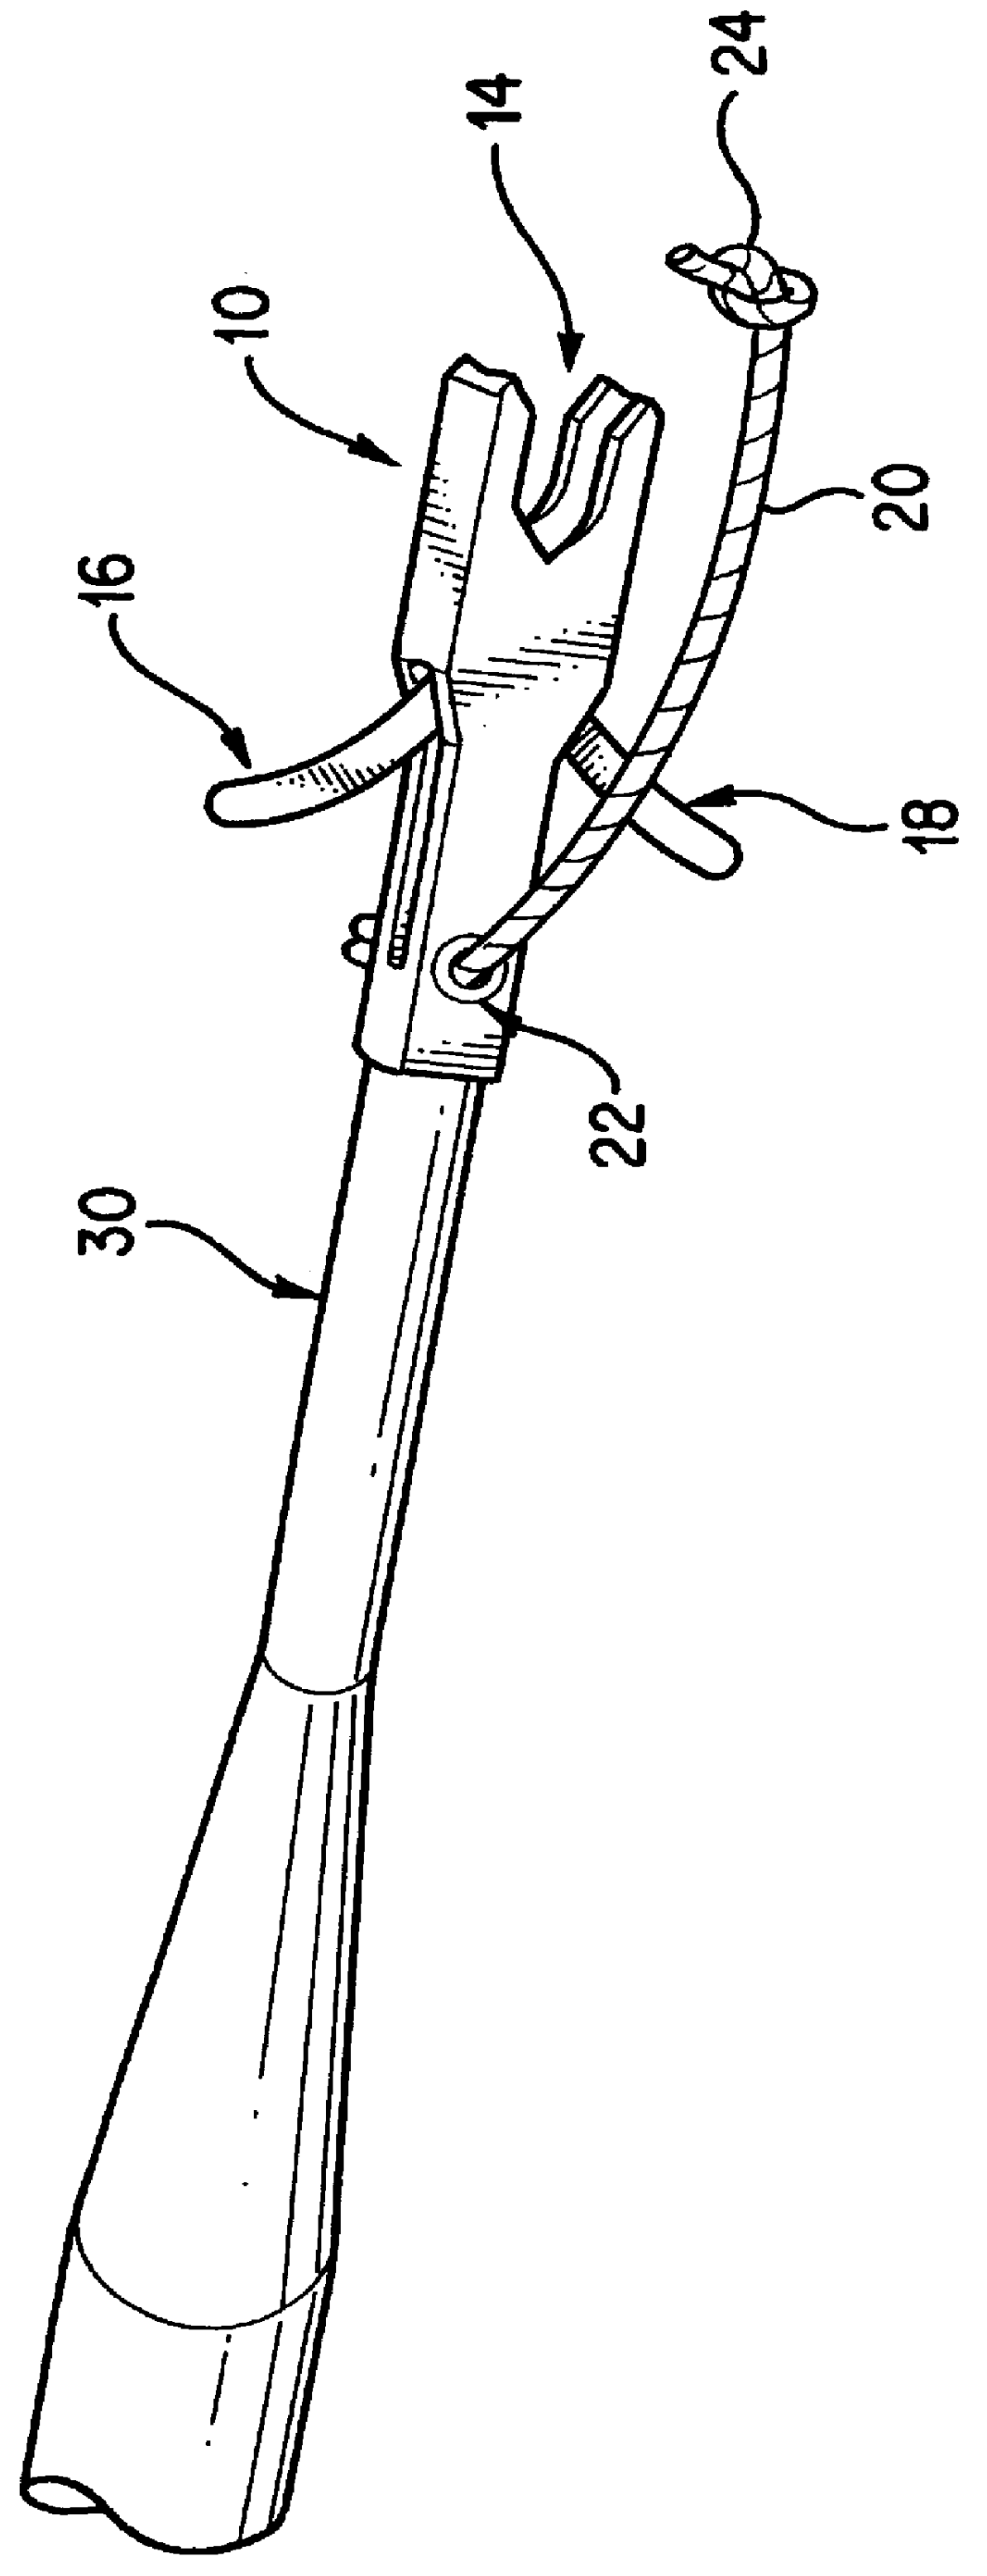 Snagging knotless suture anchor assembly